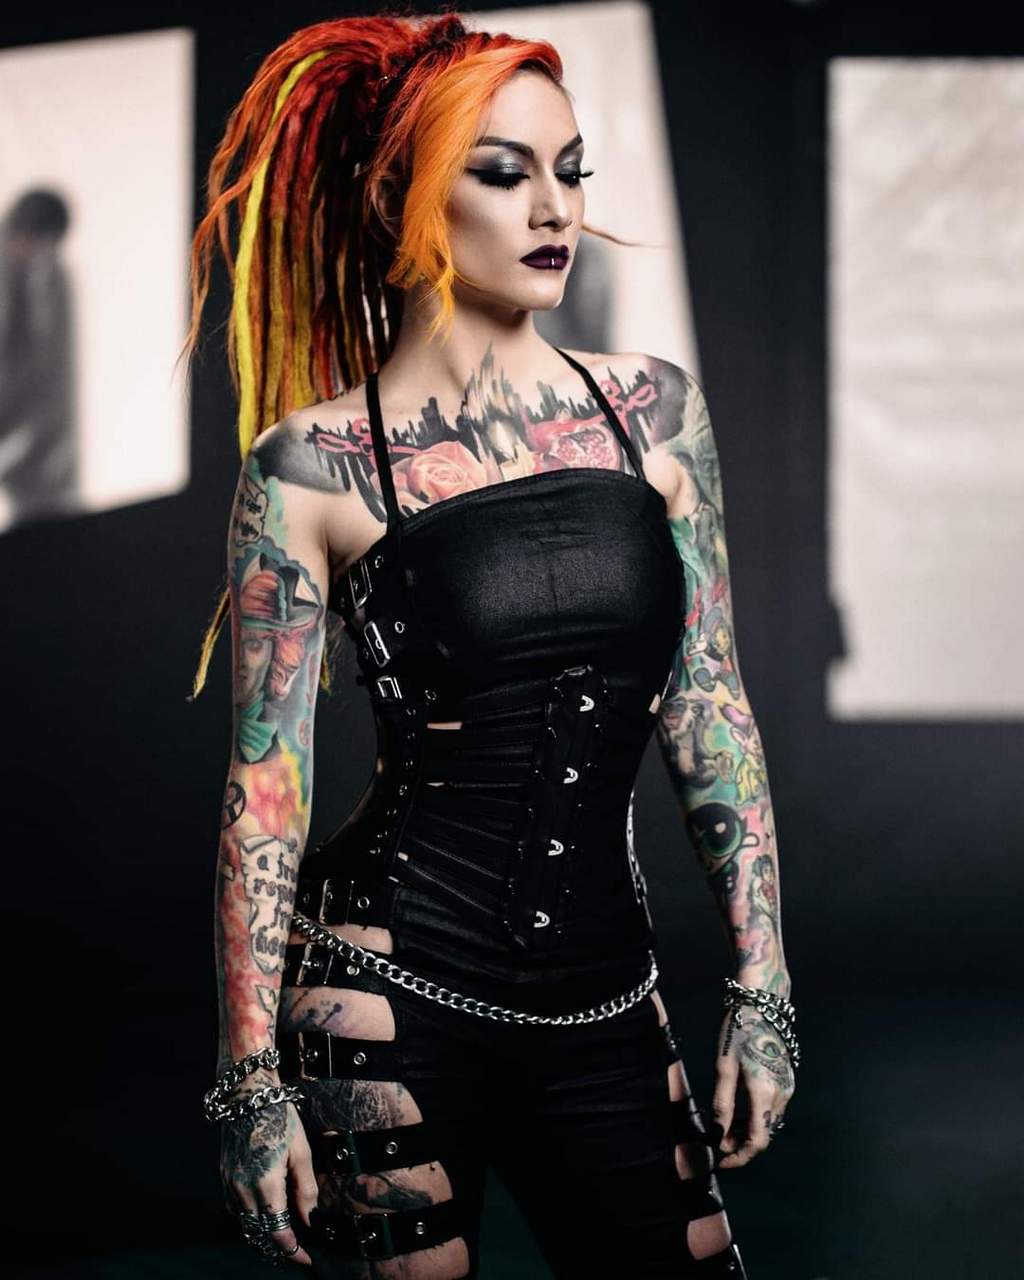 Lena Scissorhands Lead Singer From The Band Infected Rain NSFW